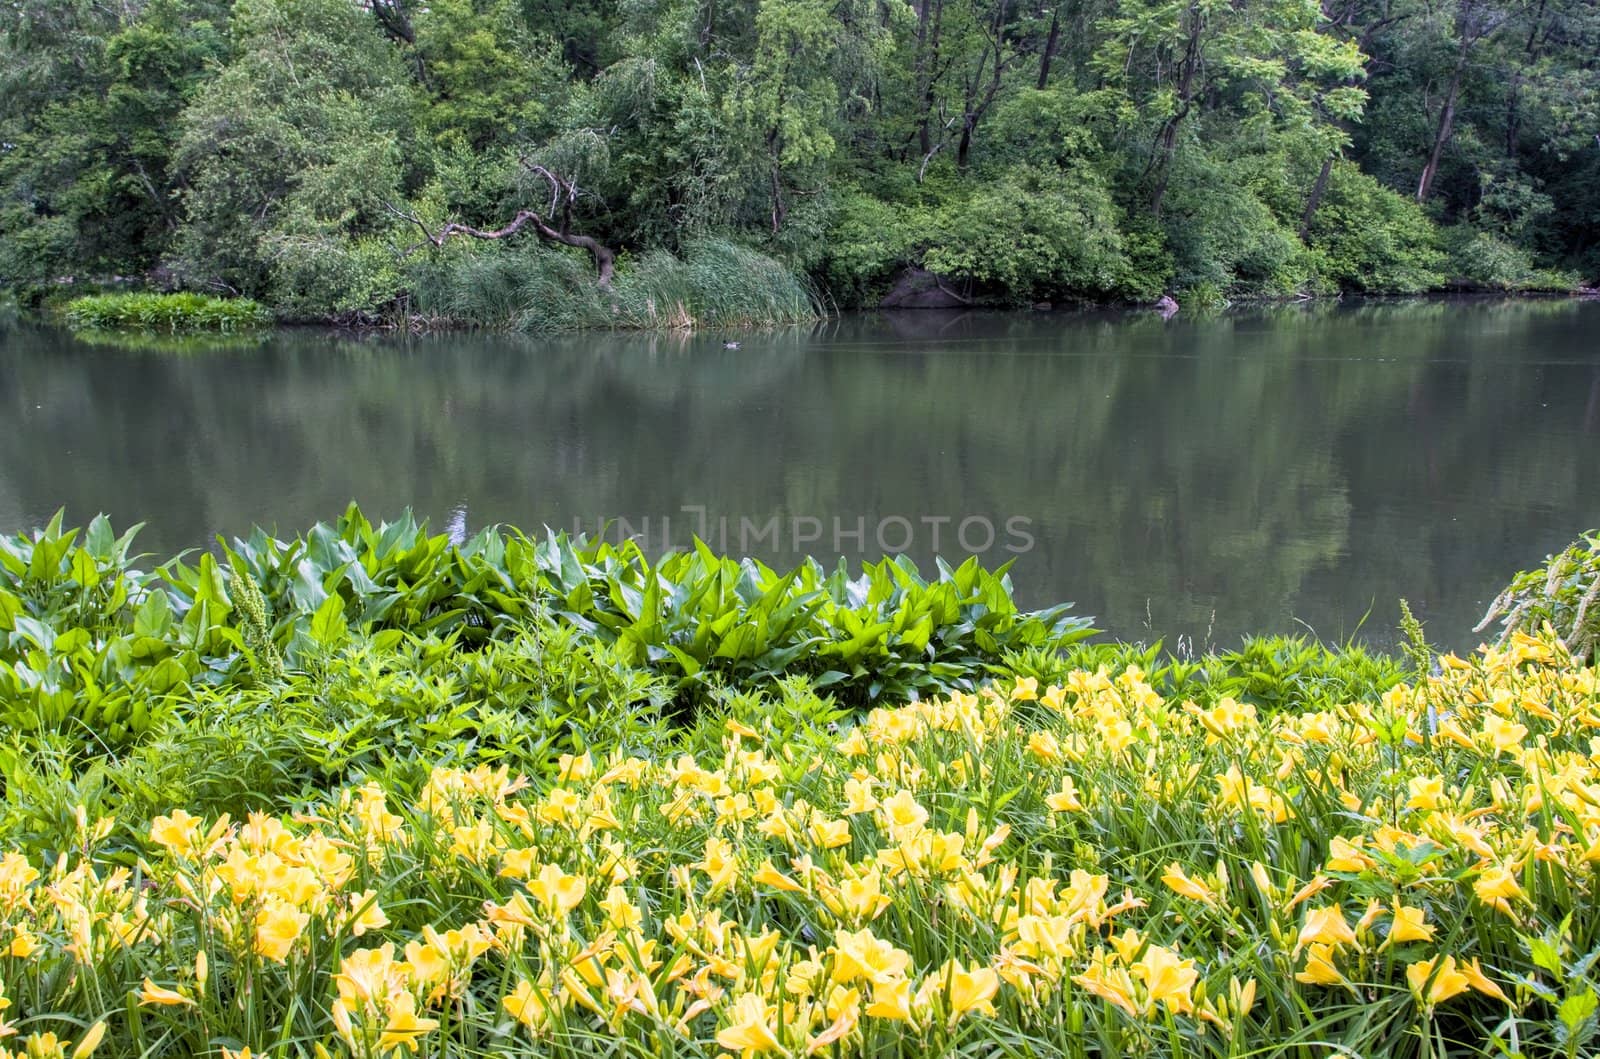 Daylily flowers on the edge of a pond in a park